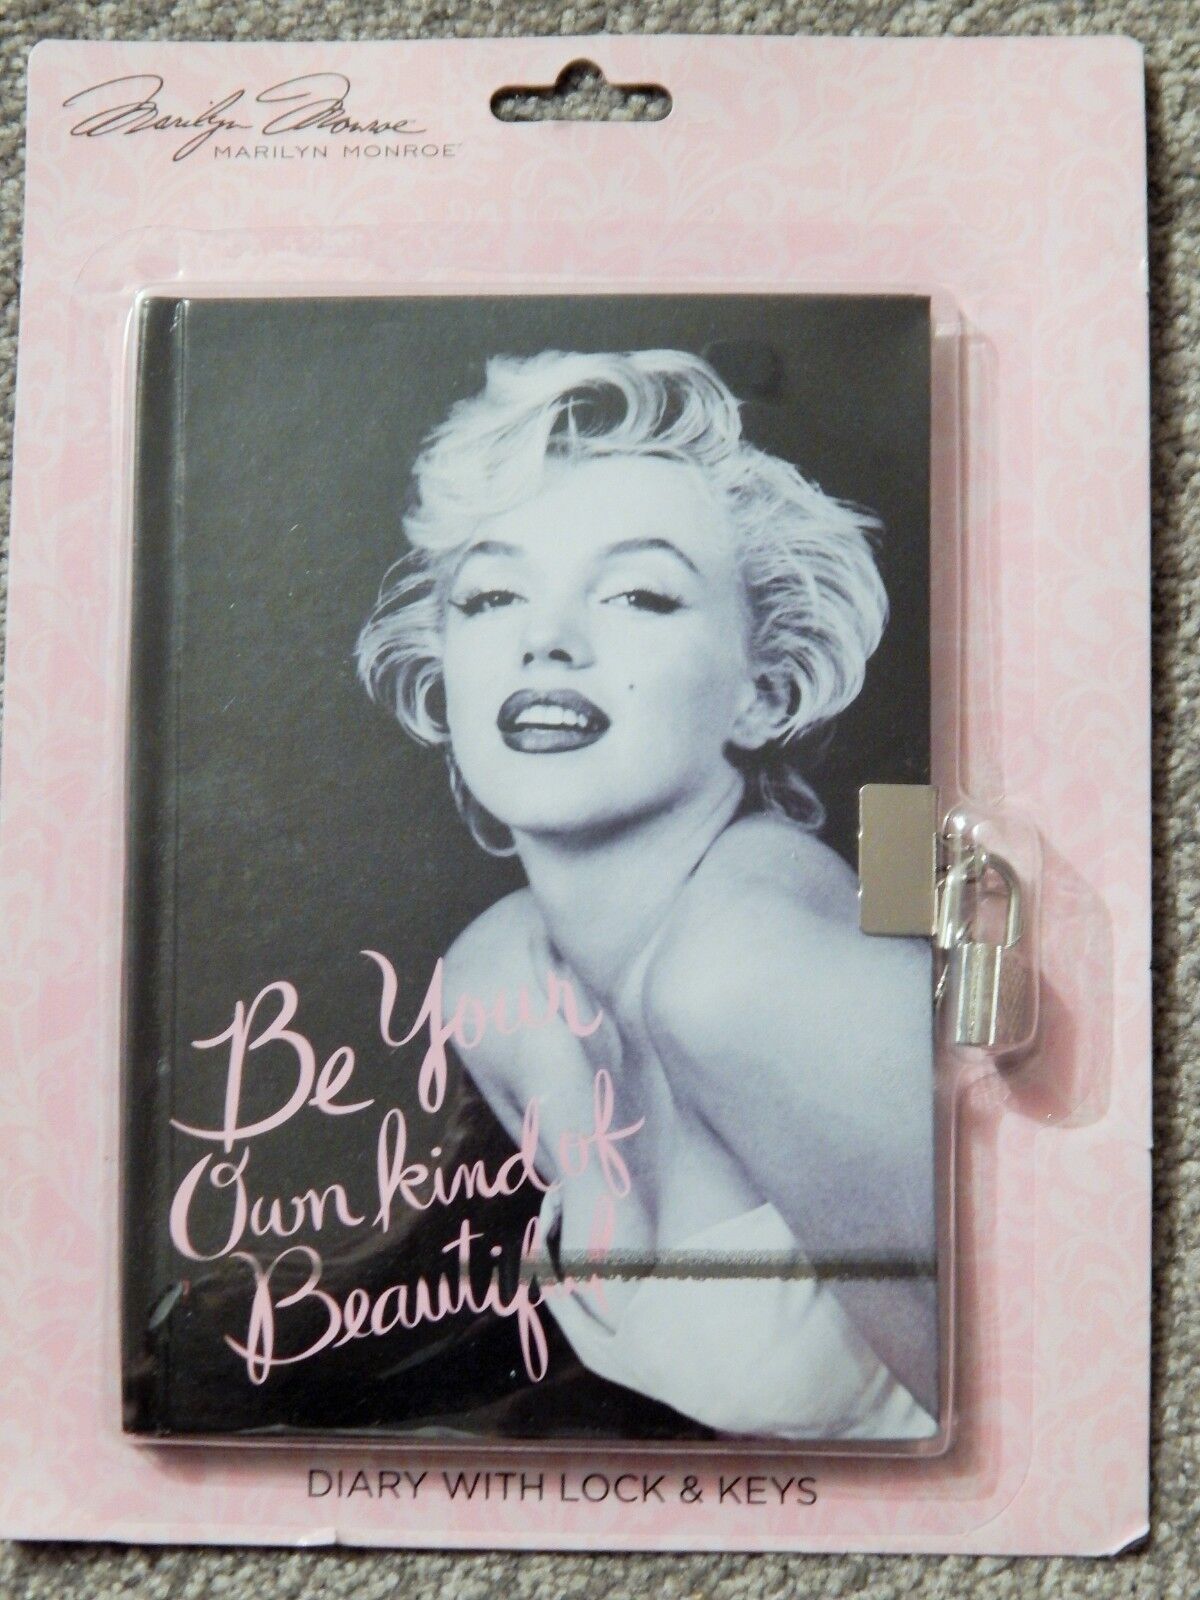 MARILYN MONROE DIARY W/LOCK & KEYS, SEALED NEW, GREAT MM Photo Poster painting COVER, NICE!